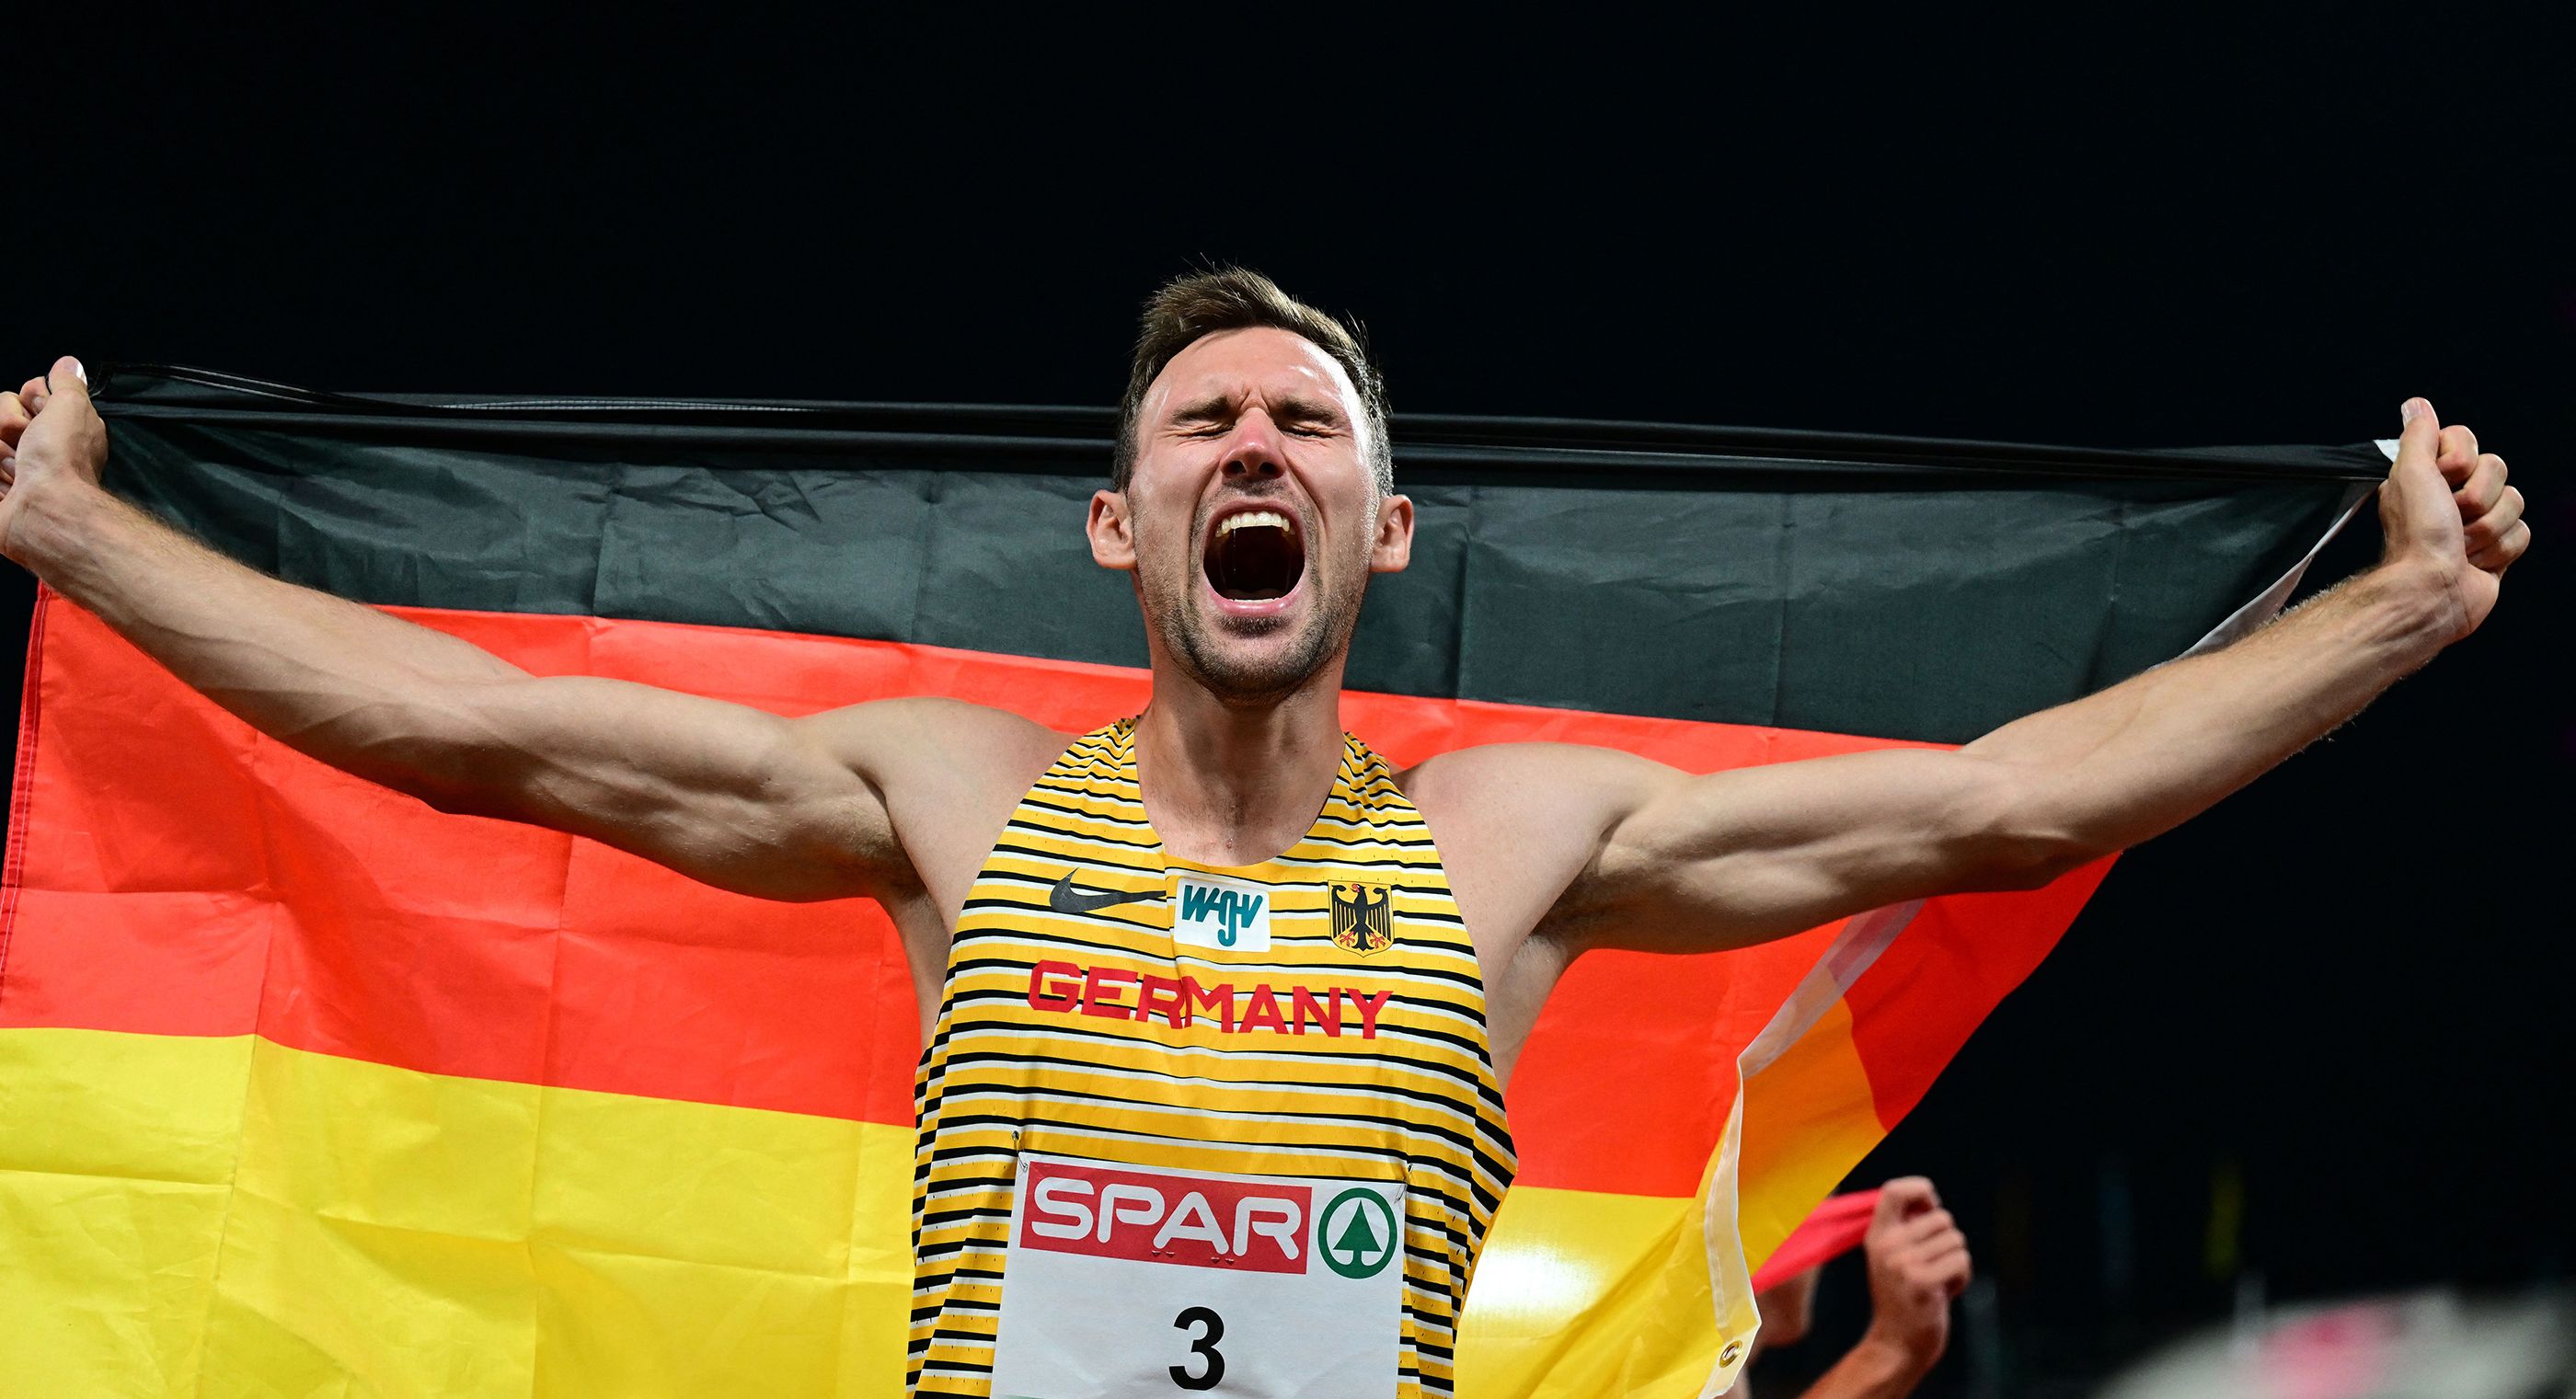 Germany's Niklas Kaul celebrates his decathlon win at the European Championships in Munich